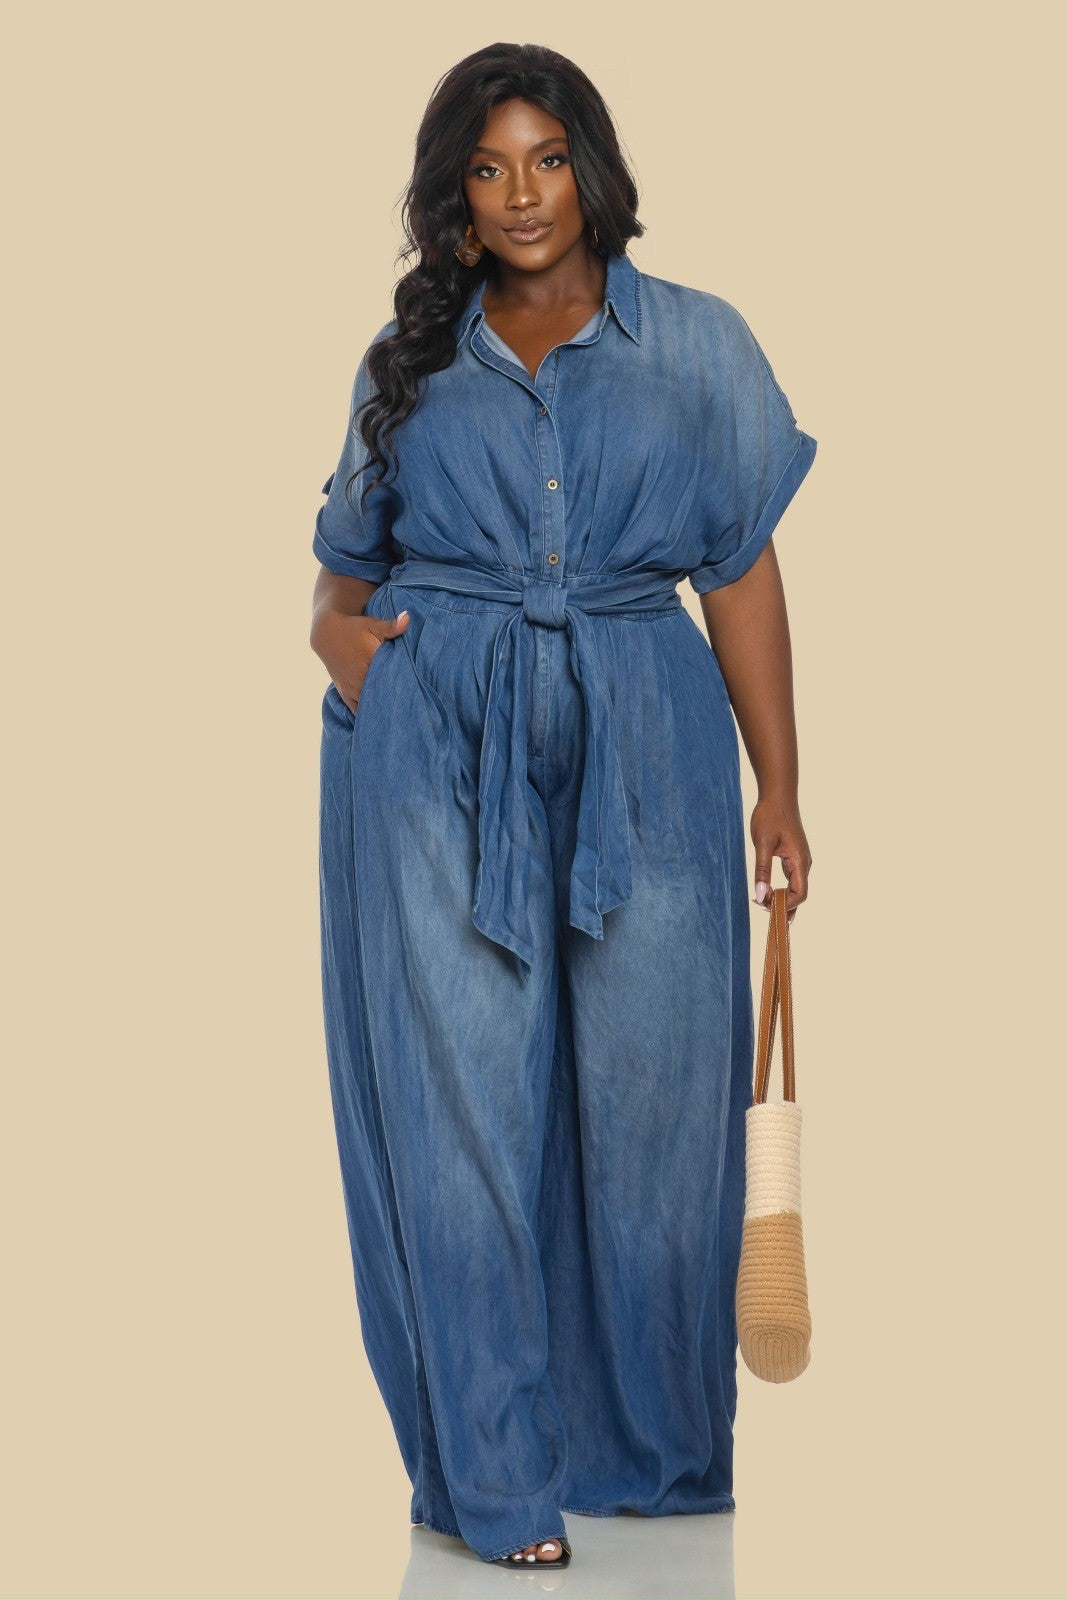 THE SANG COMPANY Jumpsuits and Rompers Plus Size Button down Belted Jumpsuit- Denim